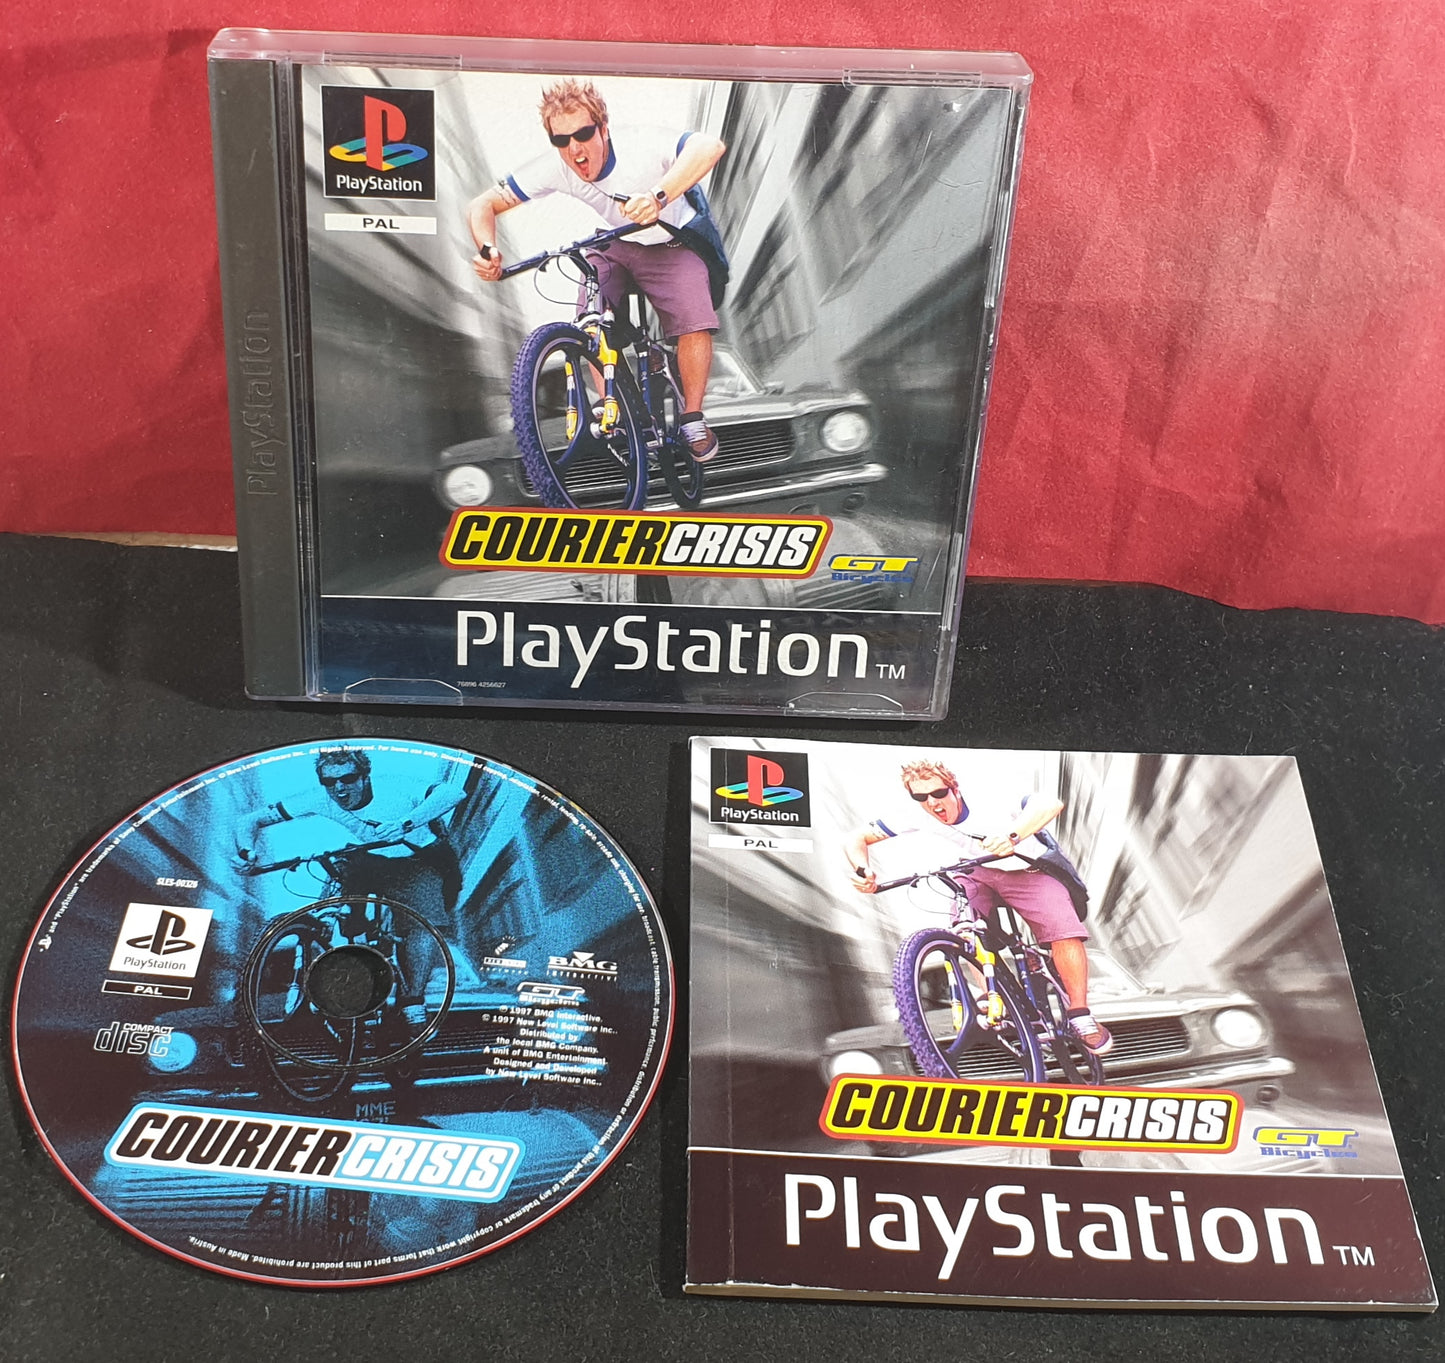 Courier Crisis Sony Playstation 1 (PS1) Game